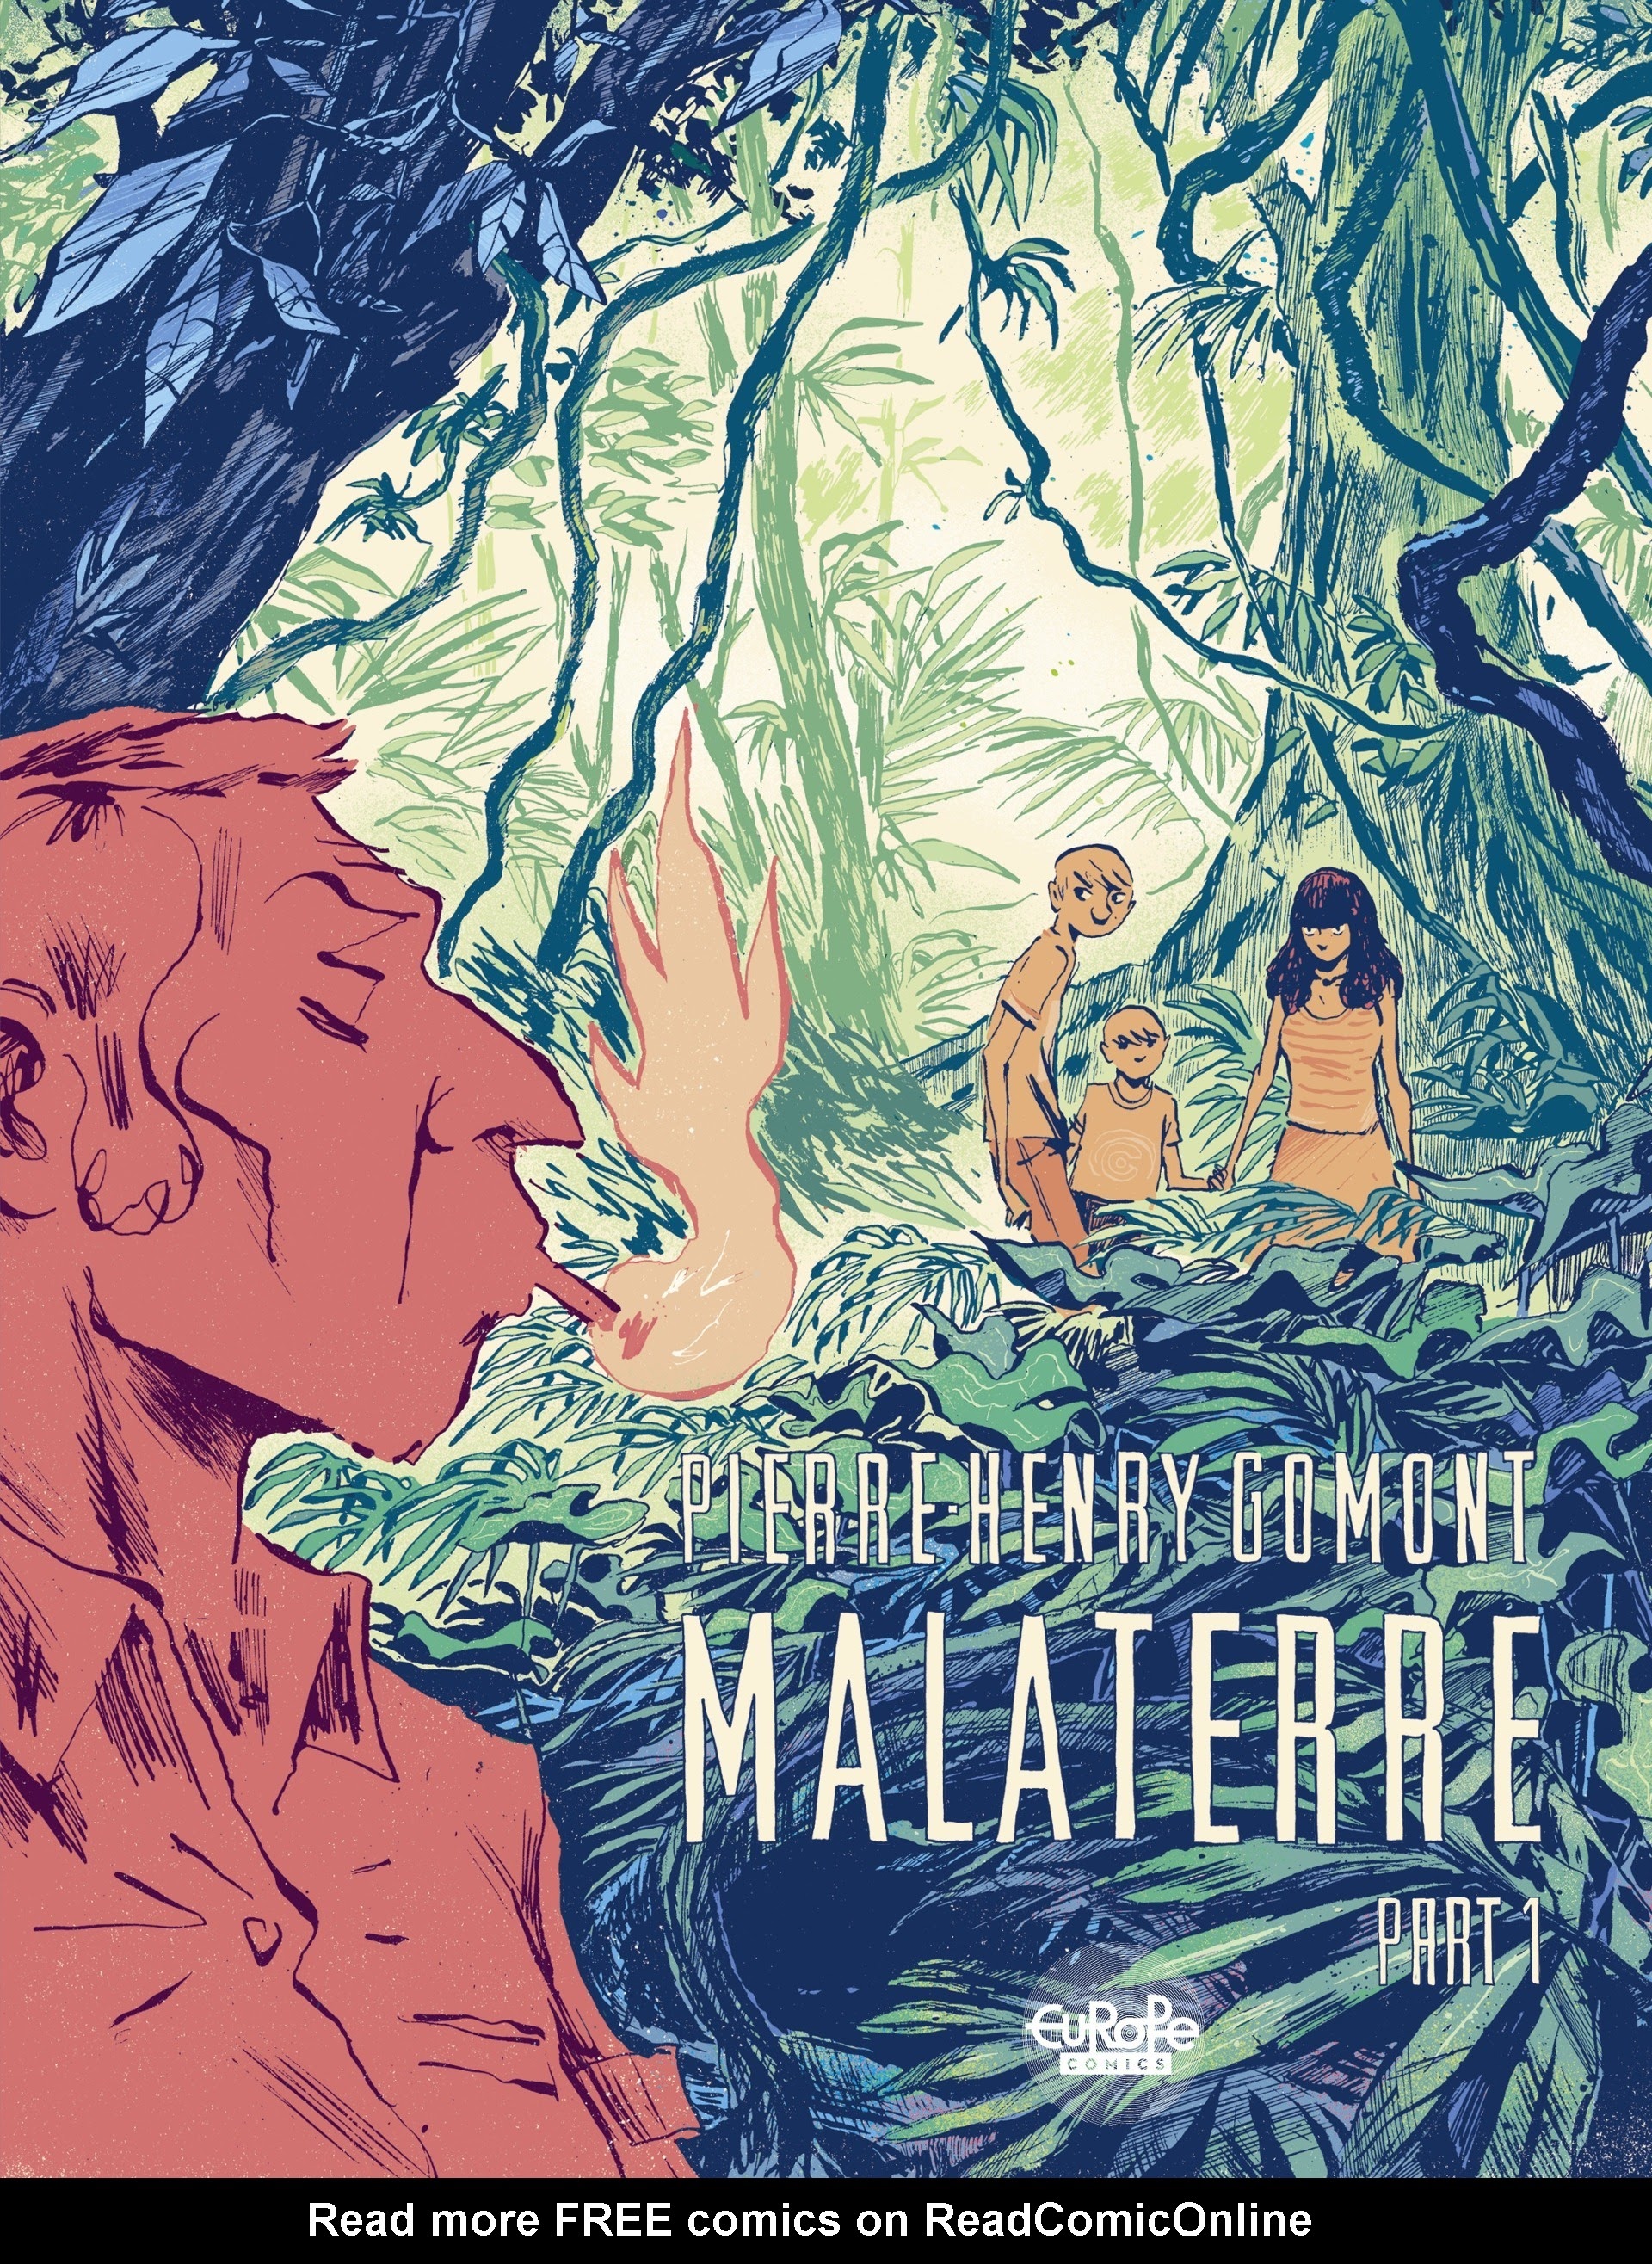 Read online Malaterre comic -  Issue # TPB 1 - 1